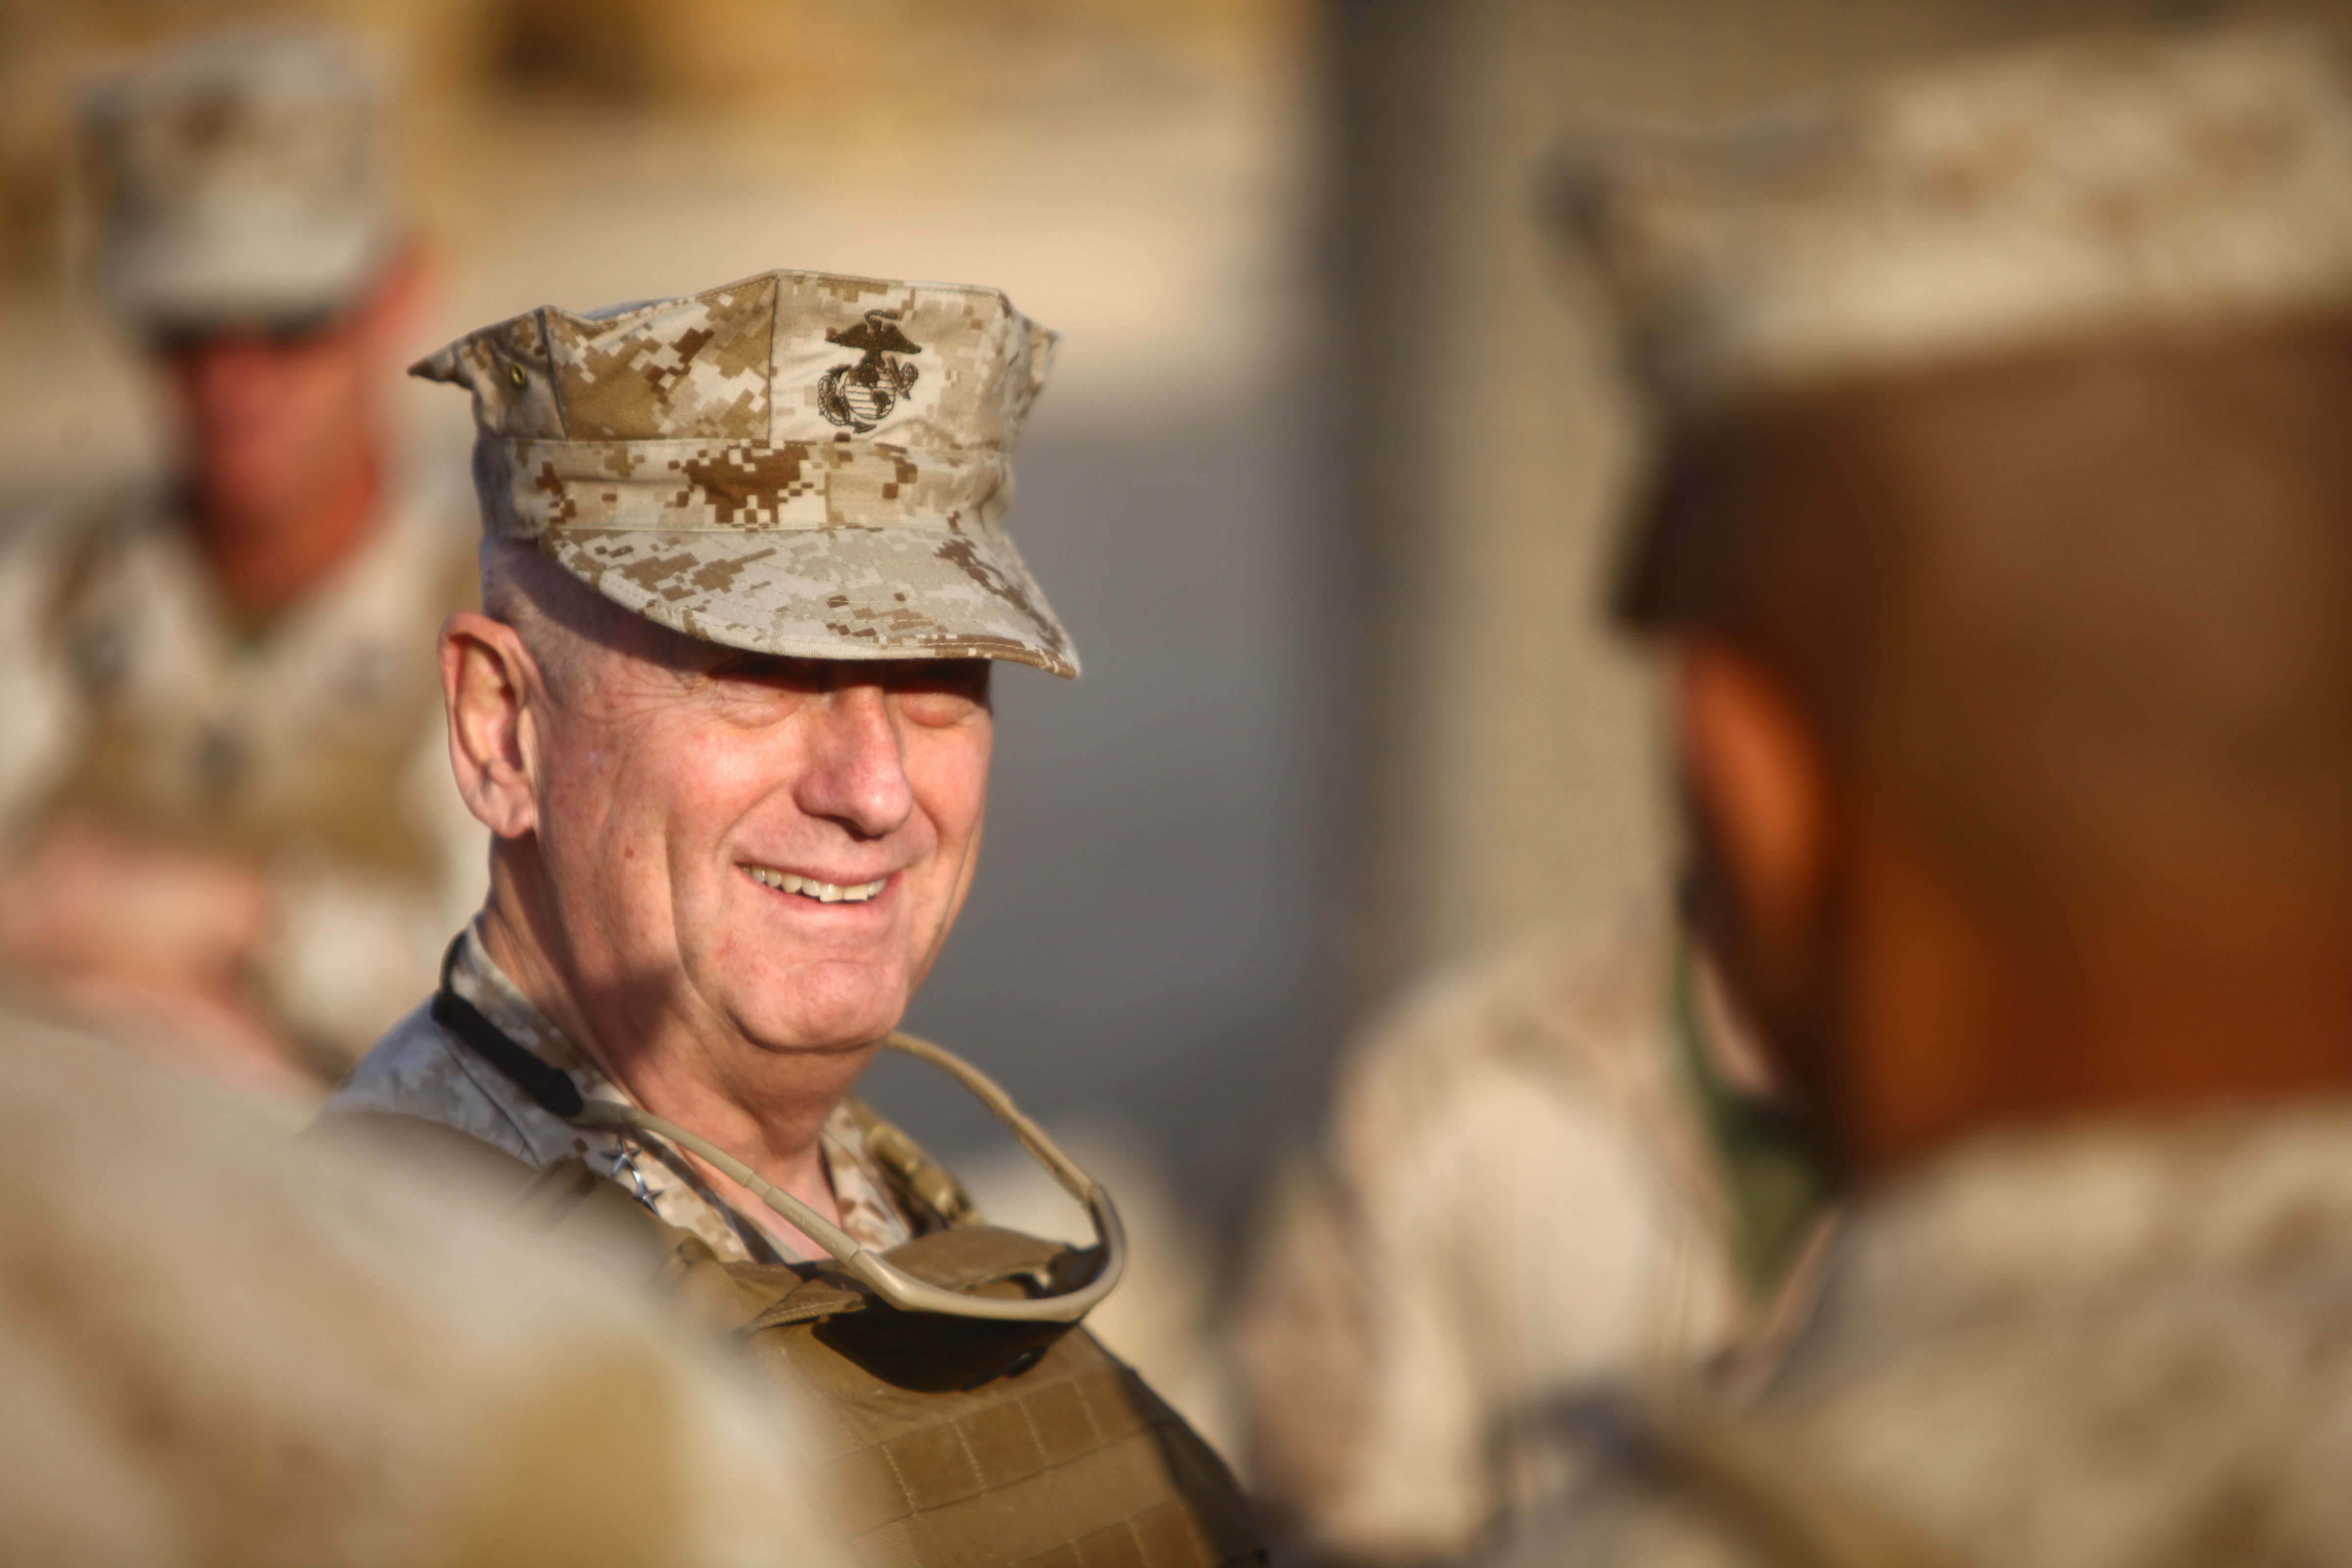 Marine General James Mattis, head of U.S. Central Command, visits troops in Afghanistan on Christmas Day, 2011. (Marine photo / LCpl Justin Loya)